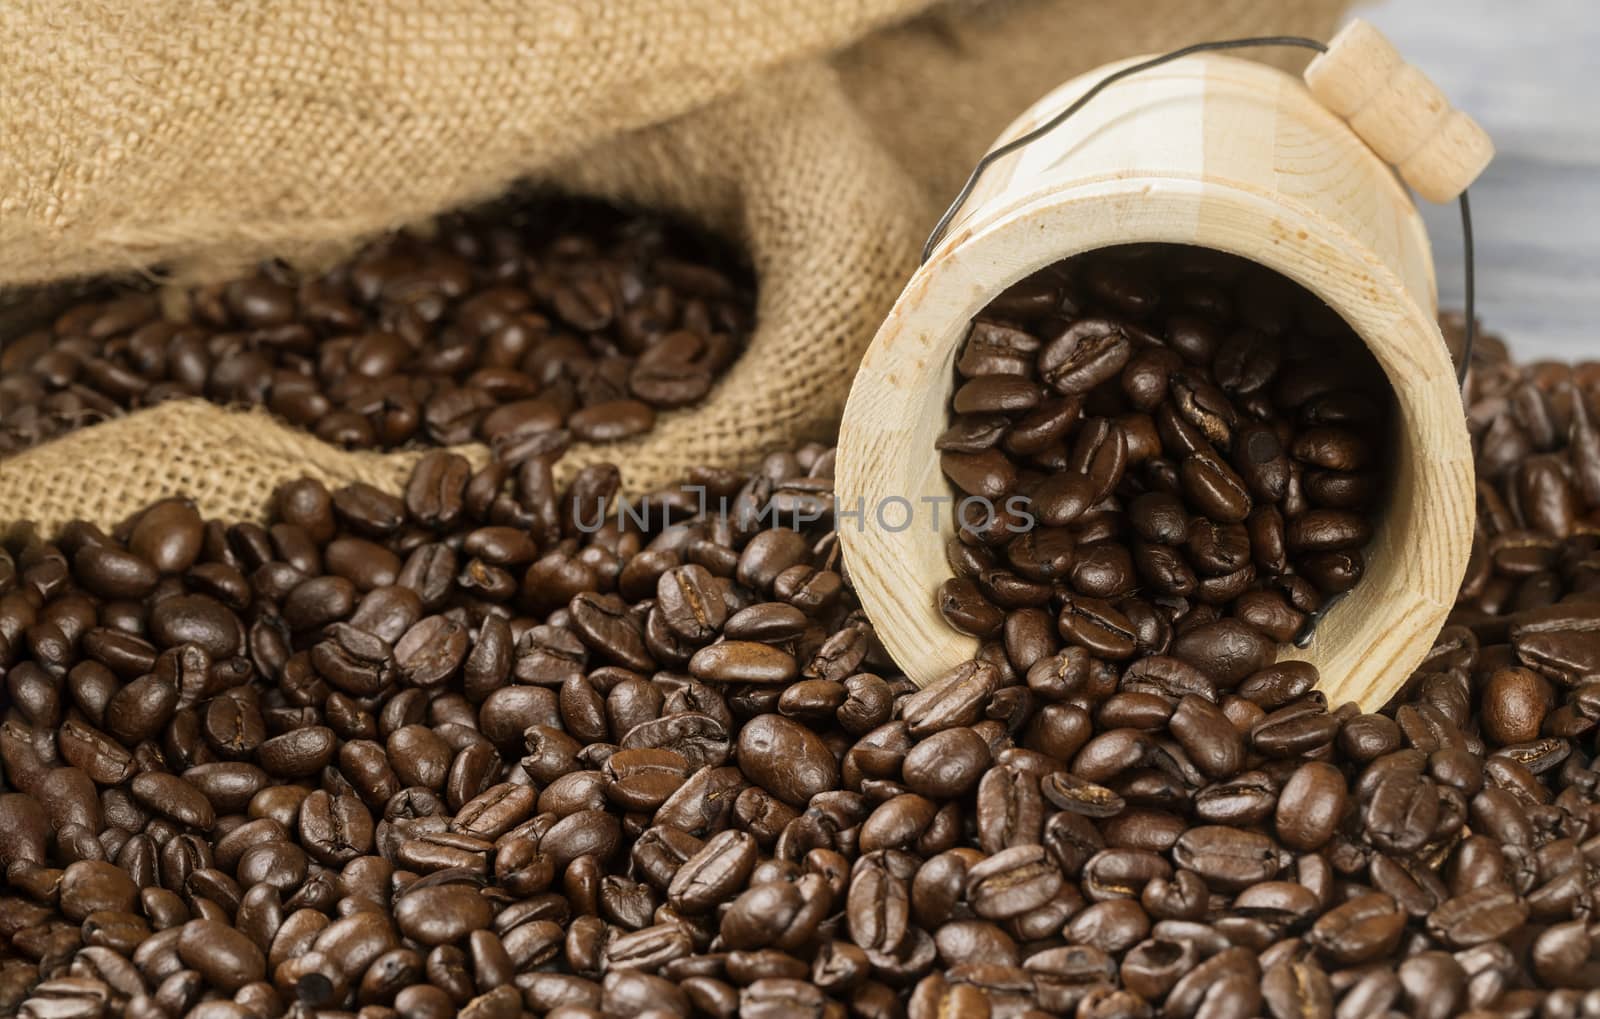 Black coffee beans with wooden cup and bag.